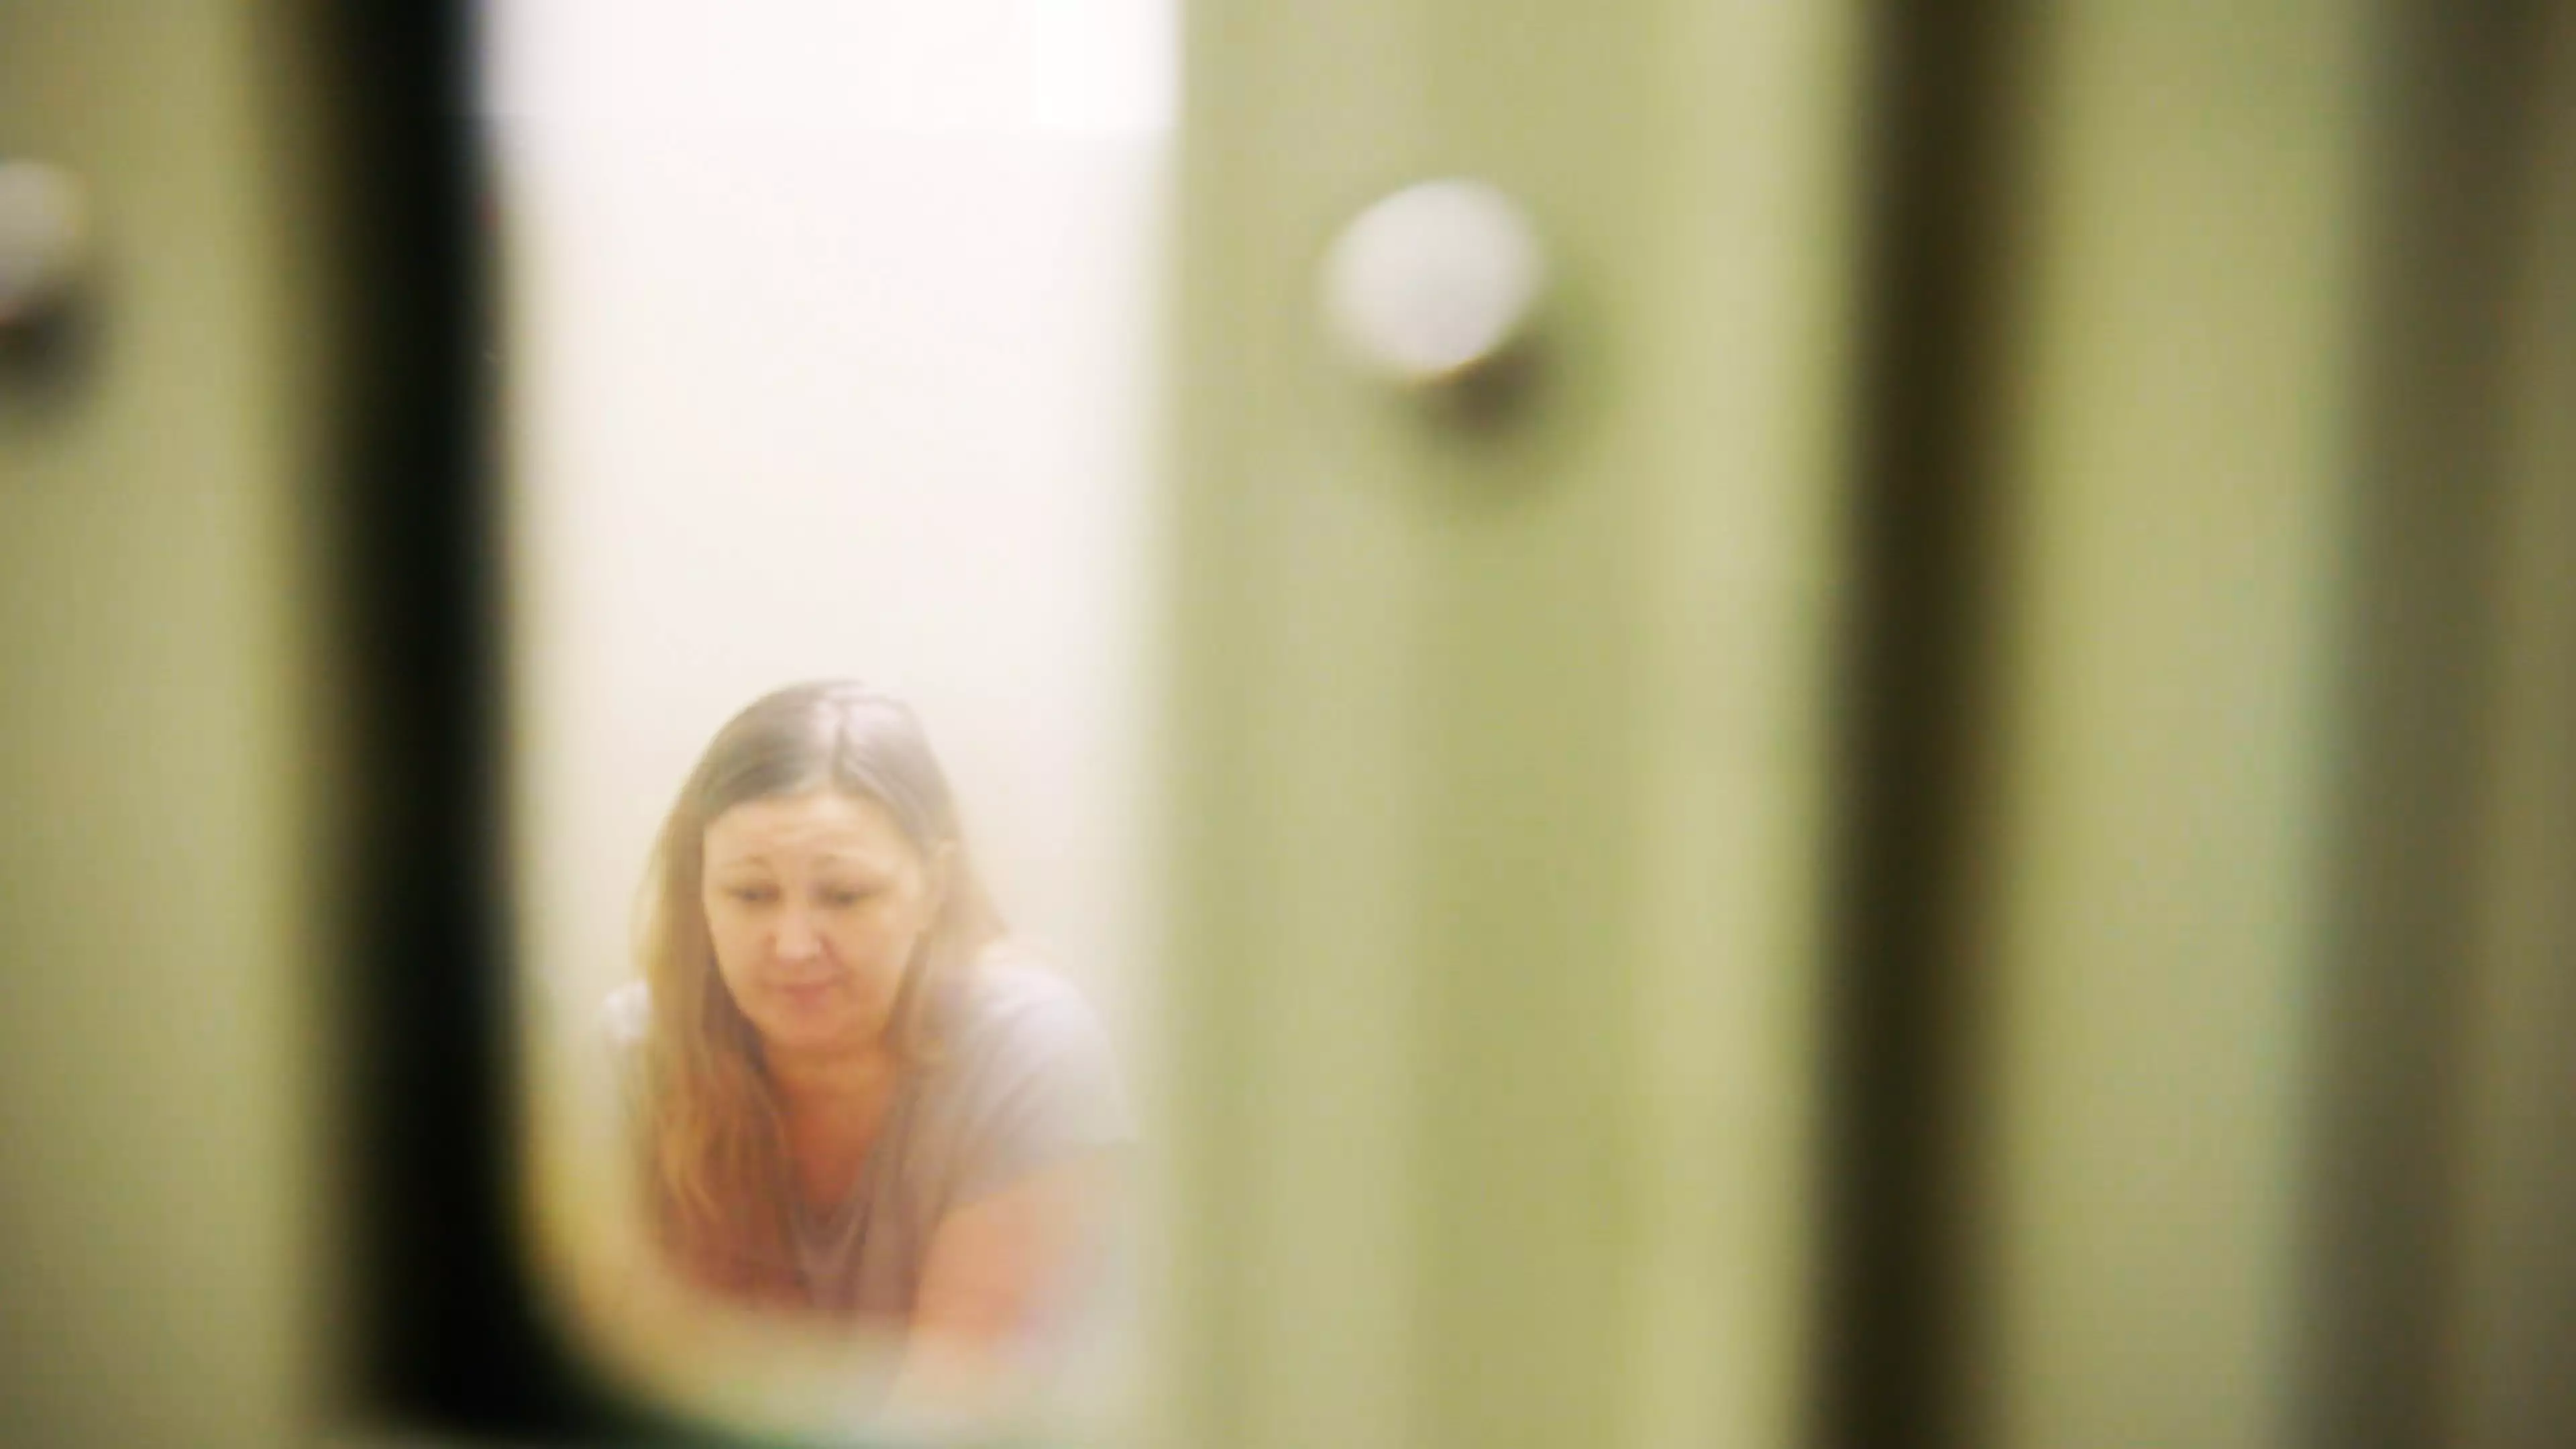 Inmate Gemma, 32, features in the first episode.